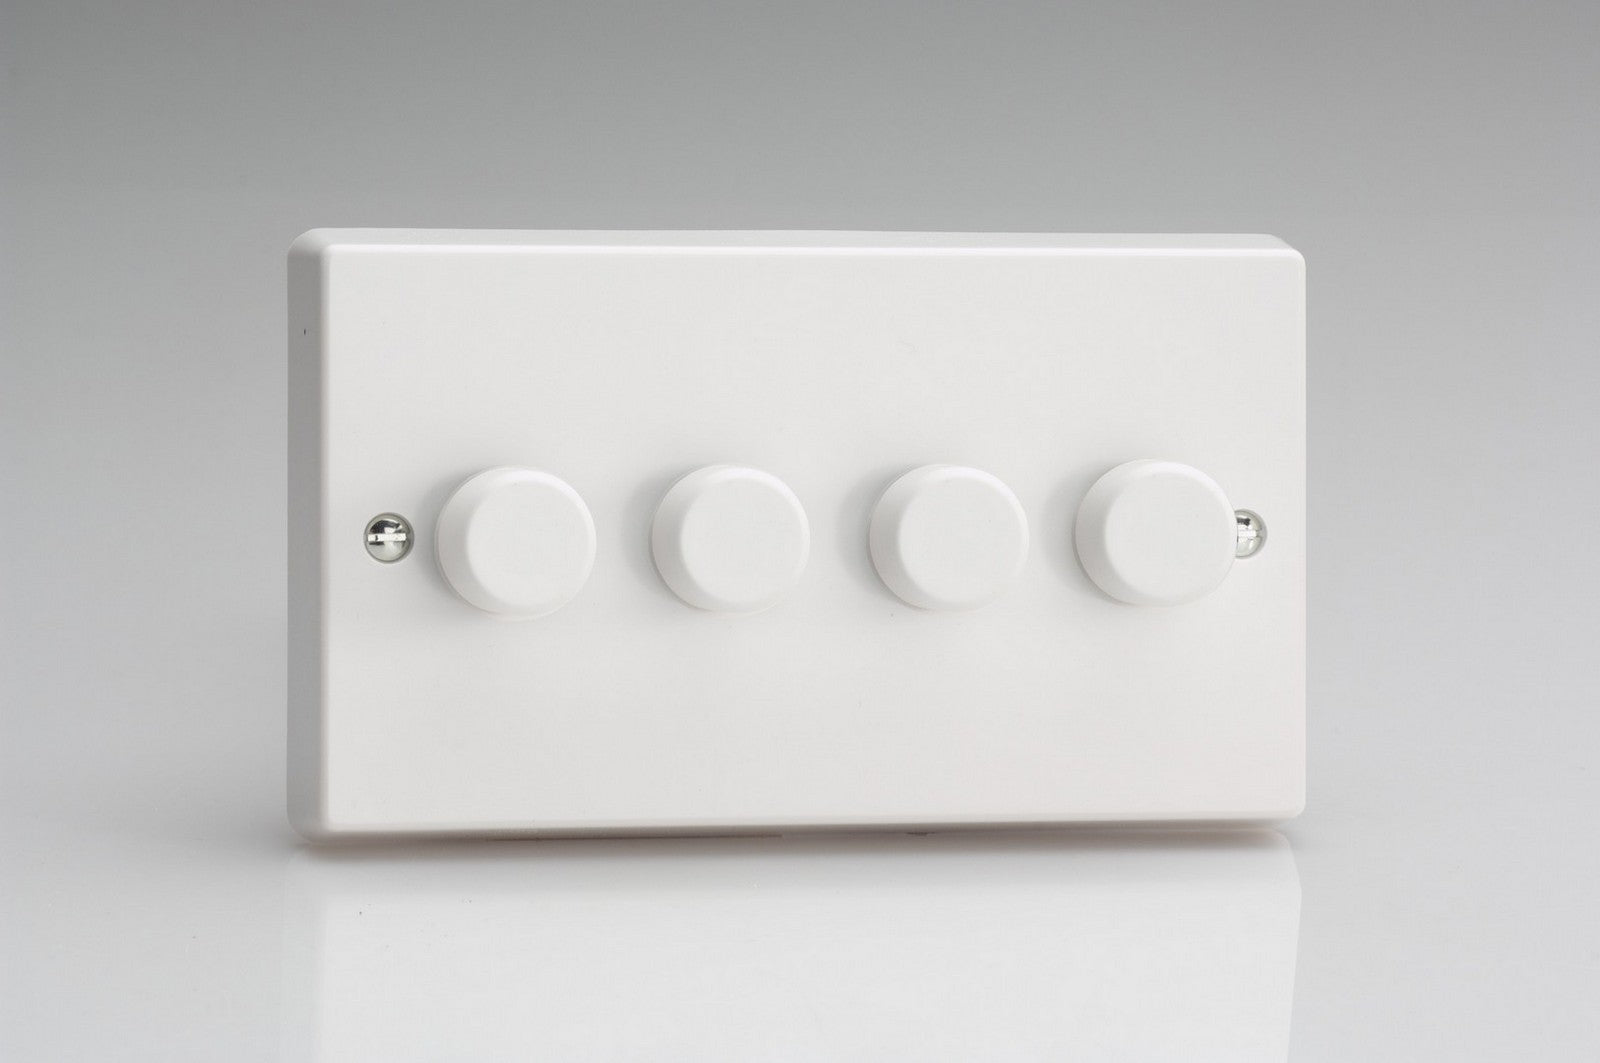 Varilight HQ44W White White Plastic 4-Gang 2-Way Push-On/Off Rotary Dimmer 4 x 40-250W (Twin Plate)